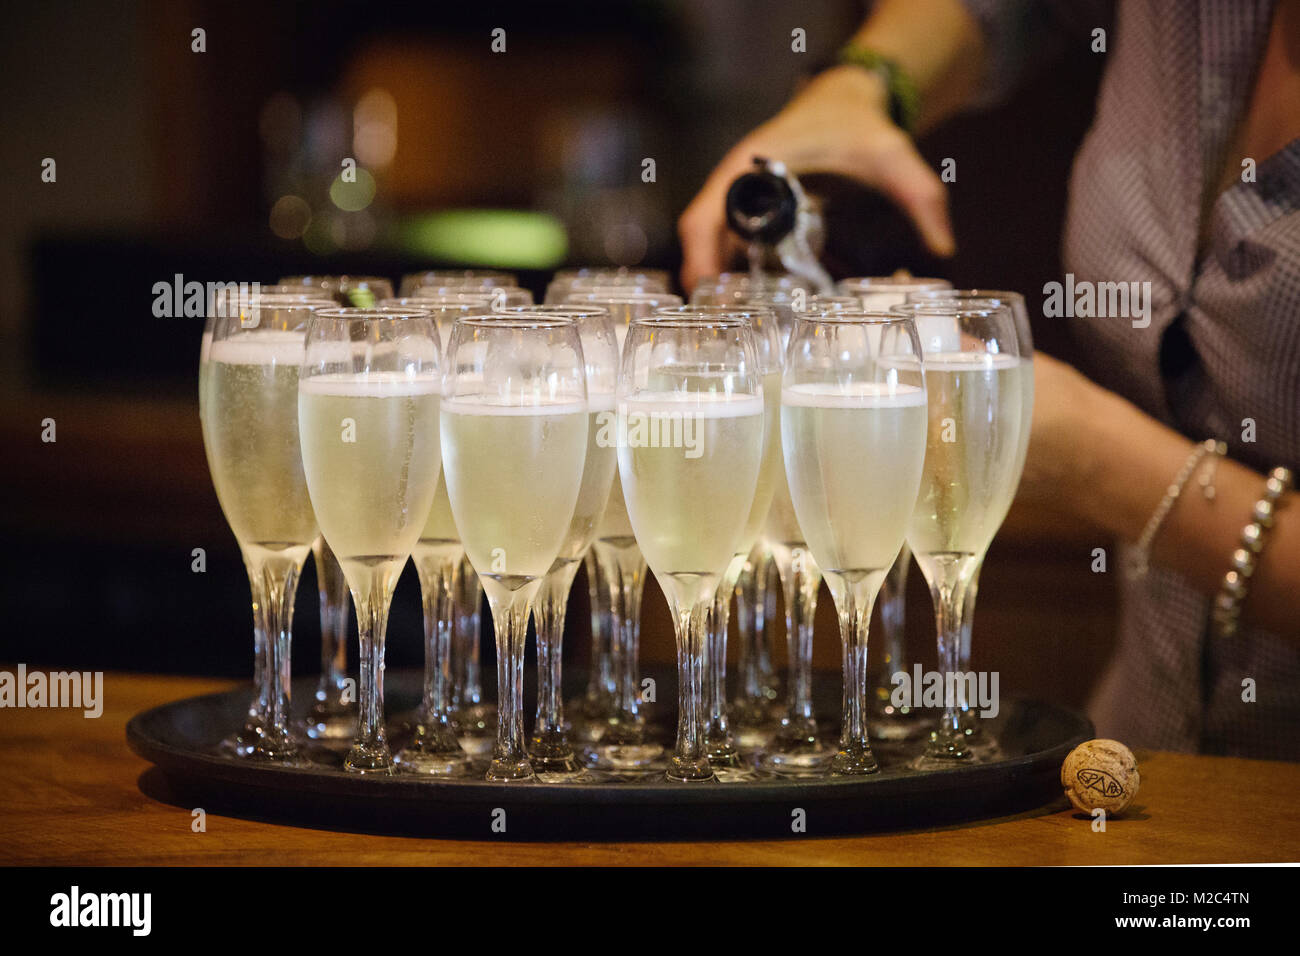 Person pouring champagne into champagne flutes, mid section, close-up Stock Photo